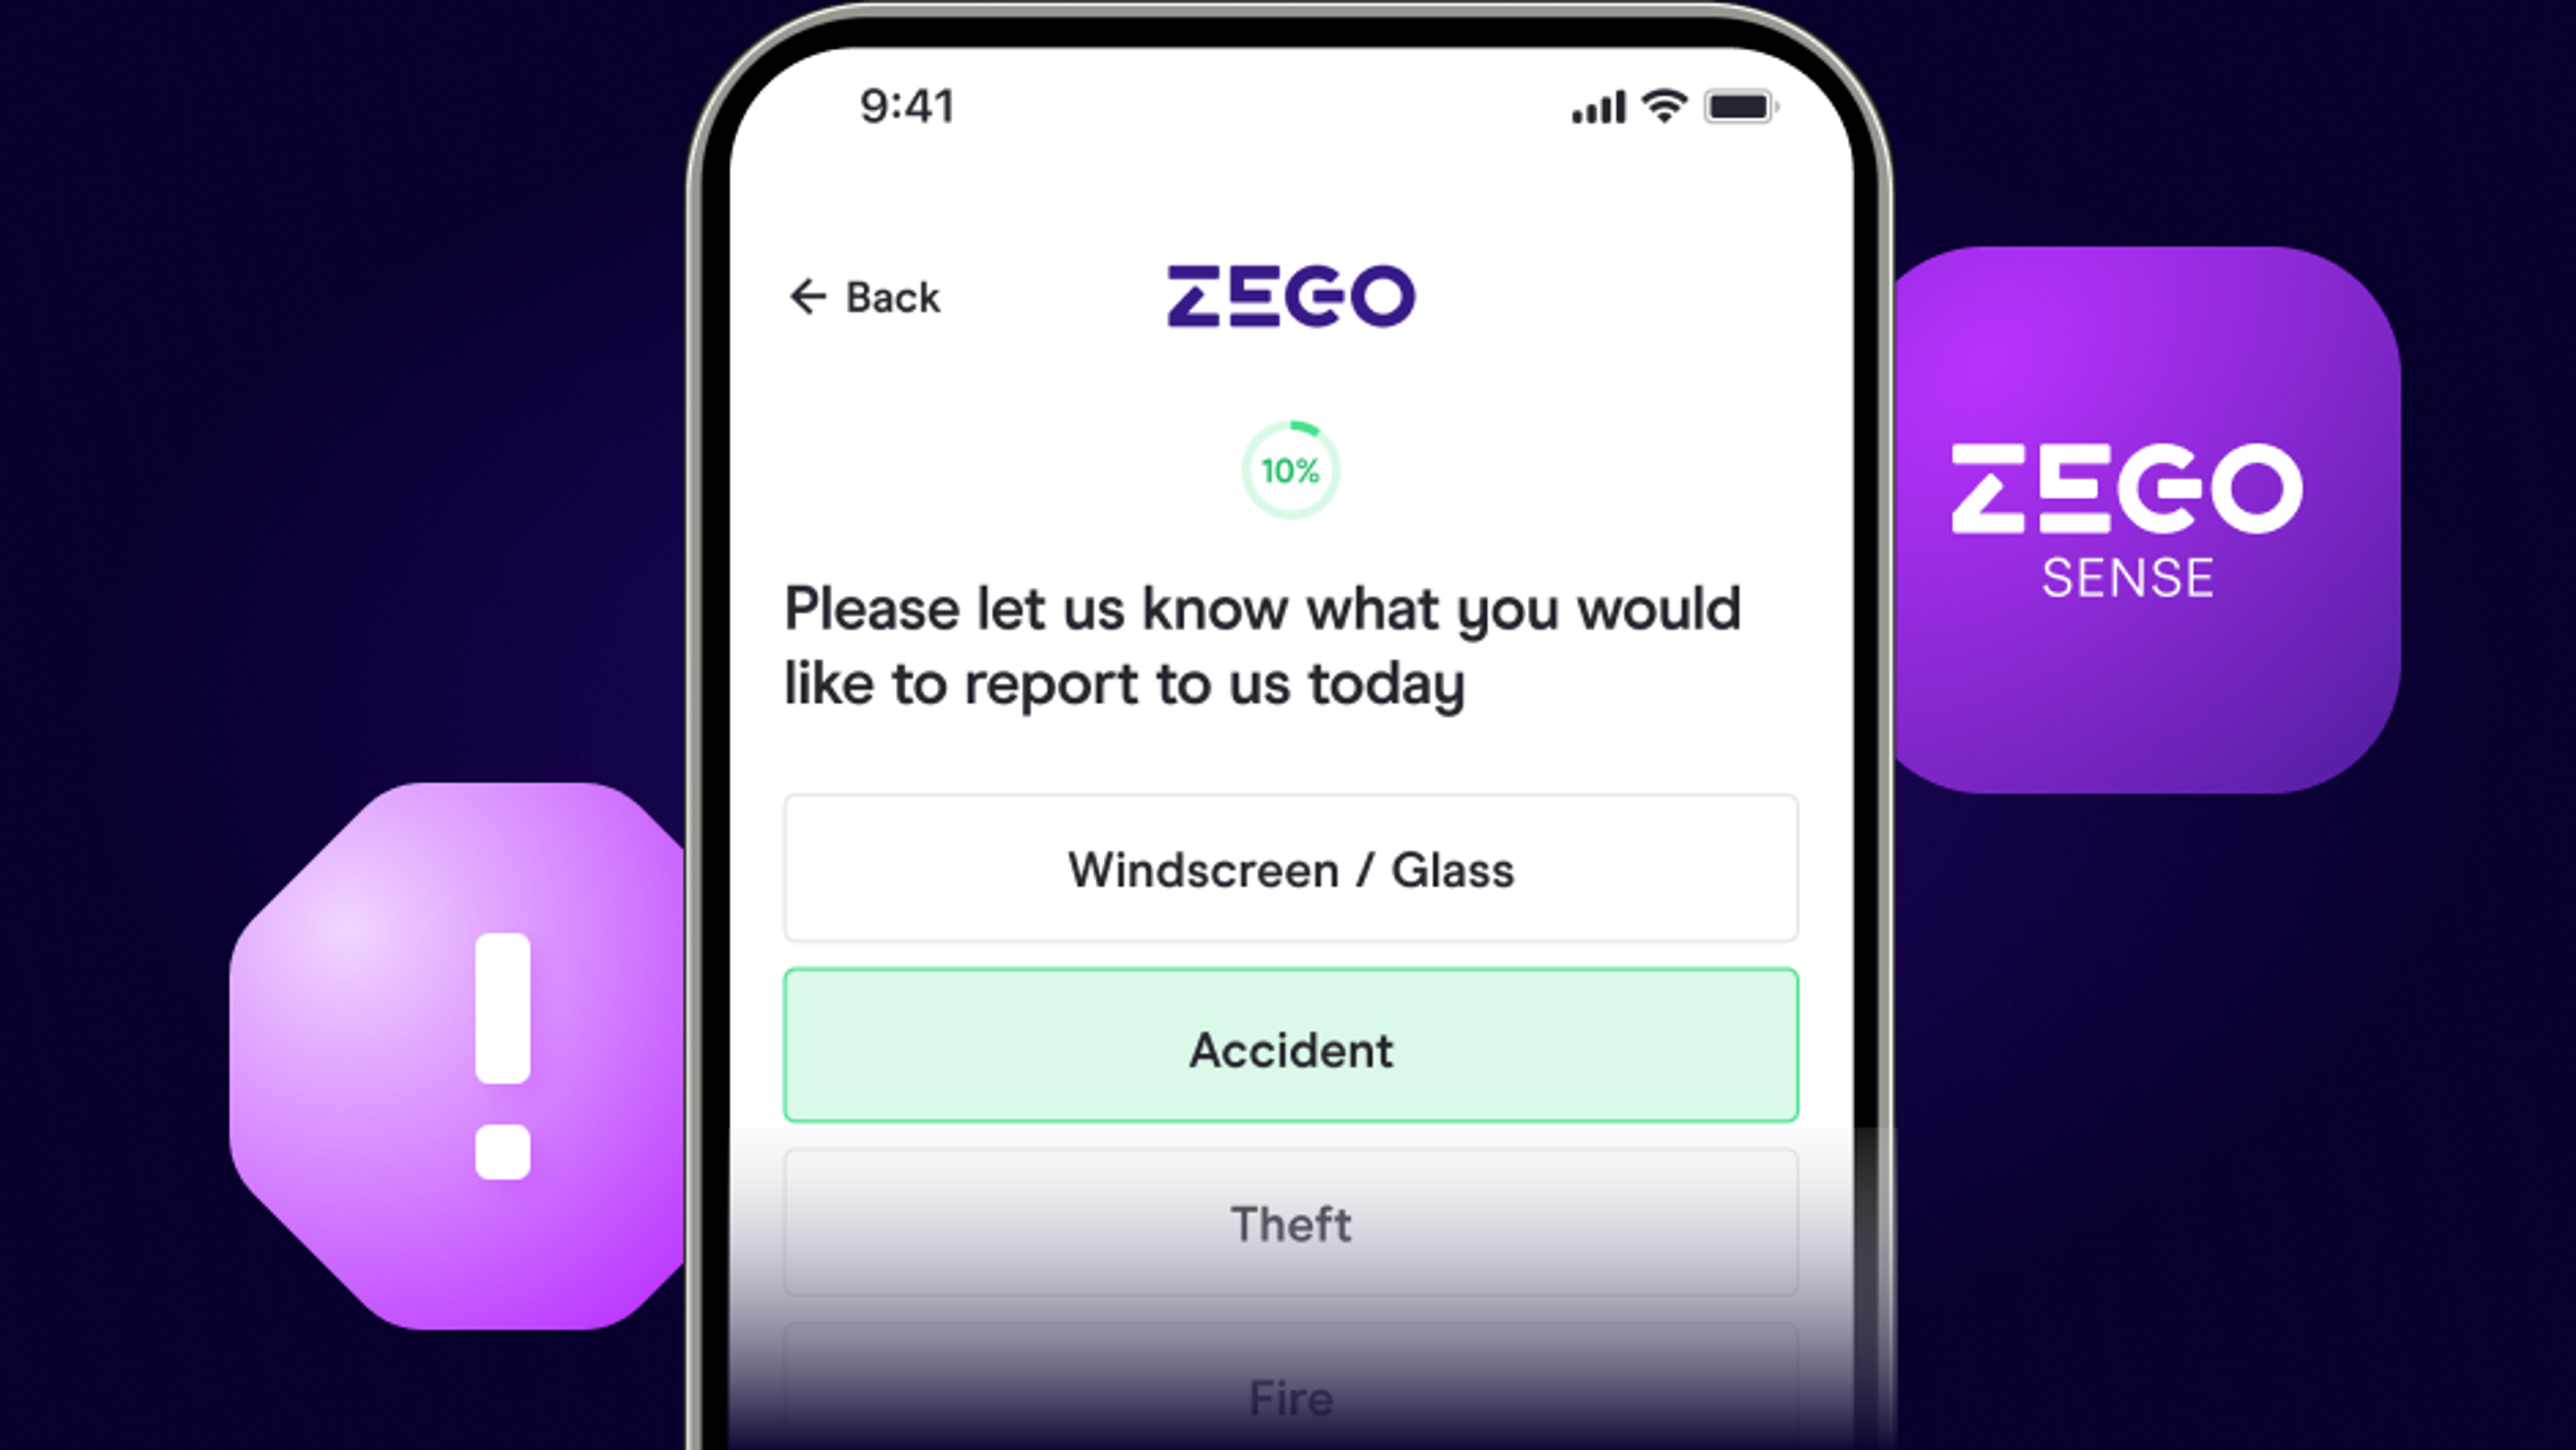 Phone screen showing Zego claims process with icons overlaid